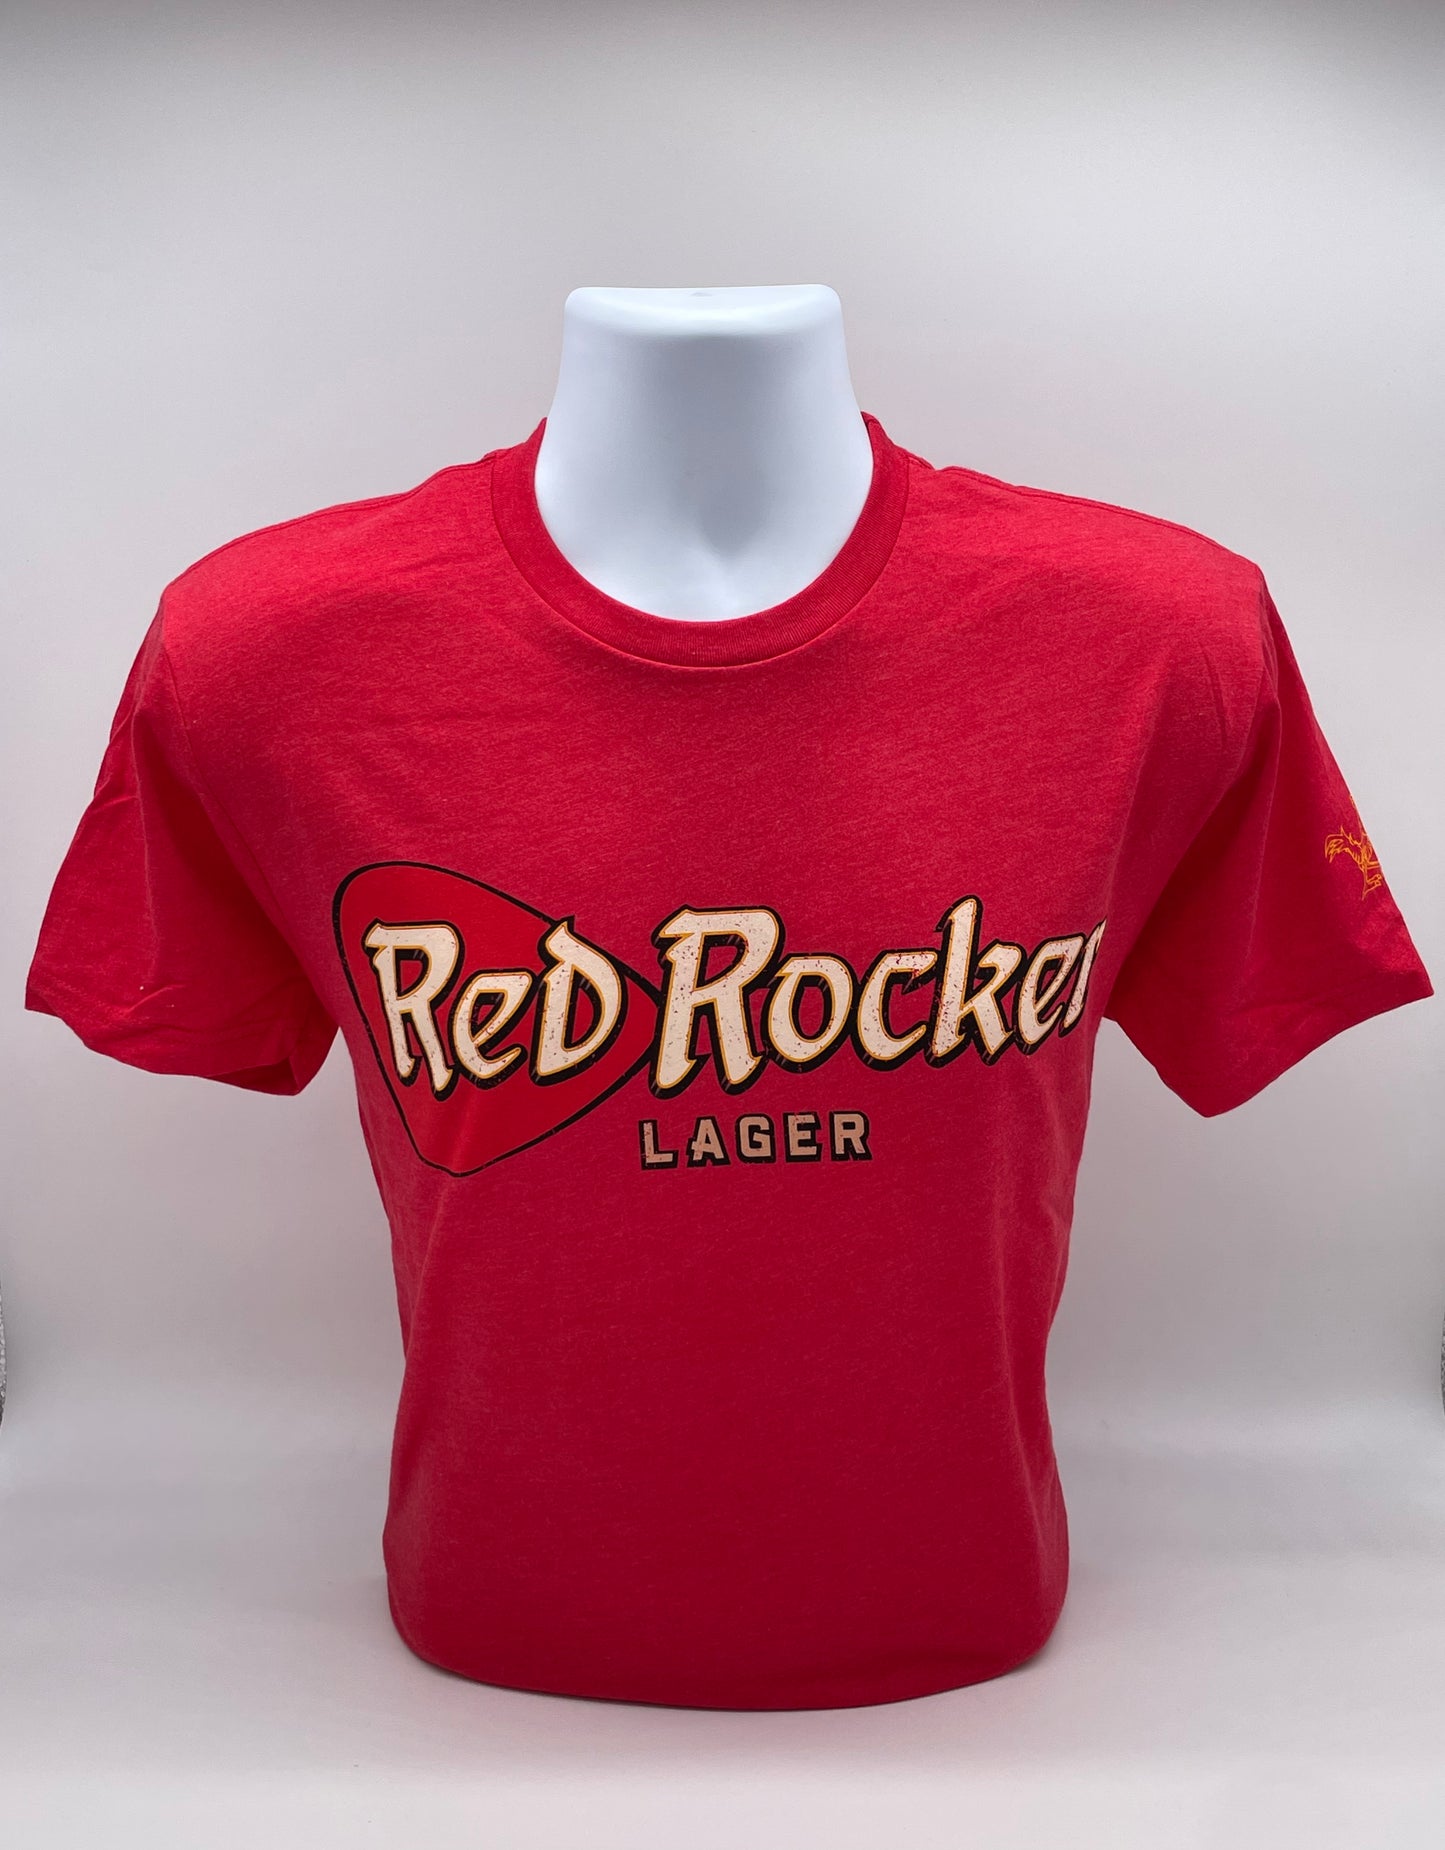 Red Rocker Lager T-shirts